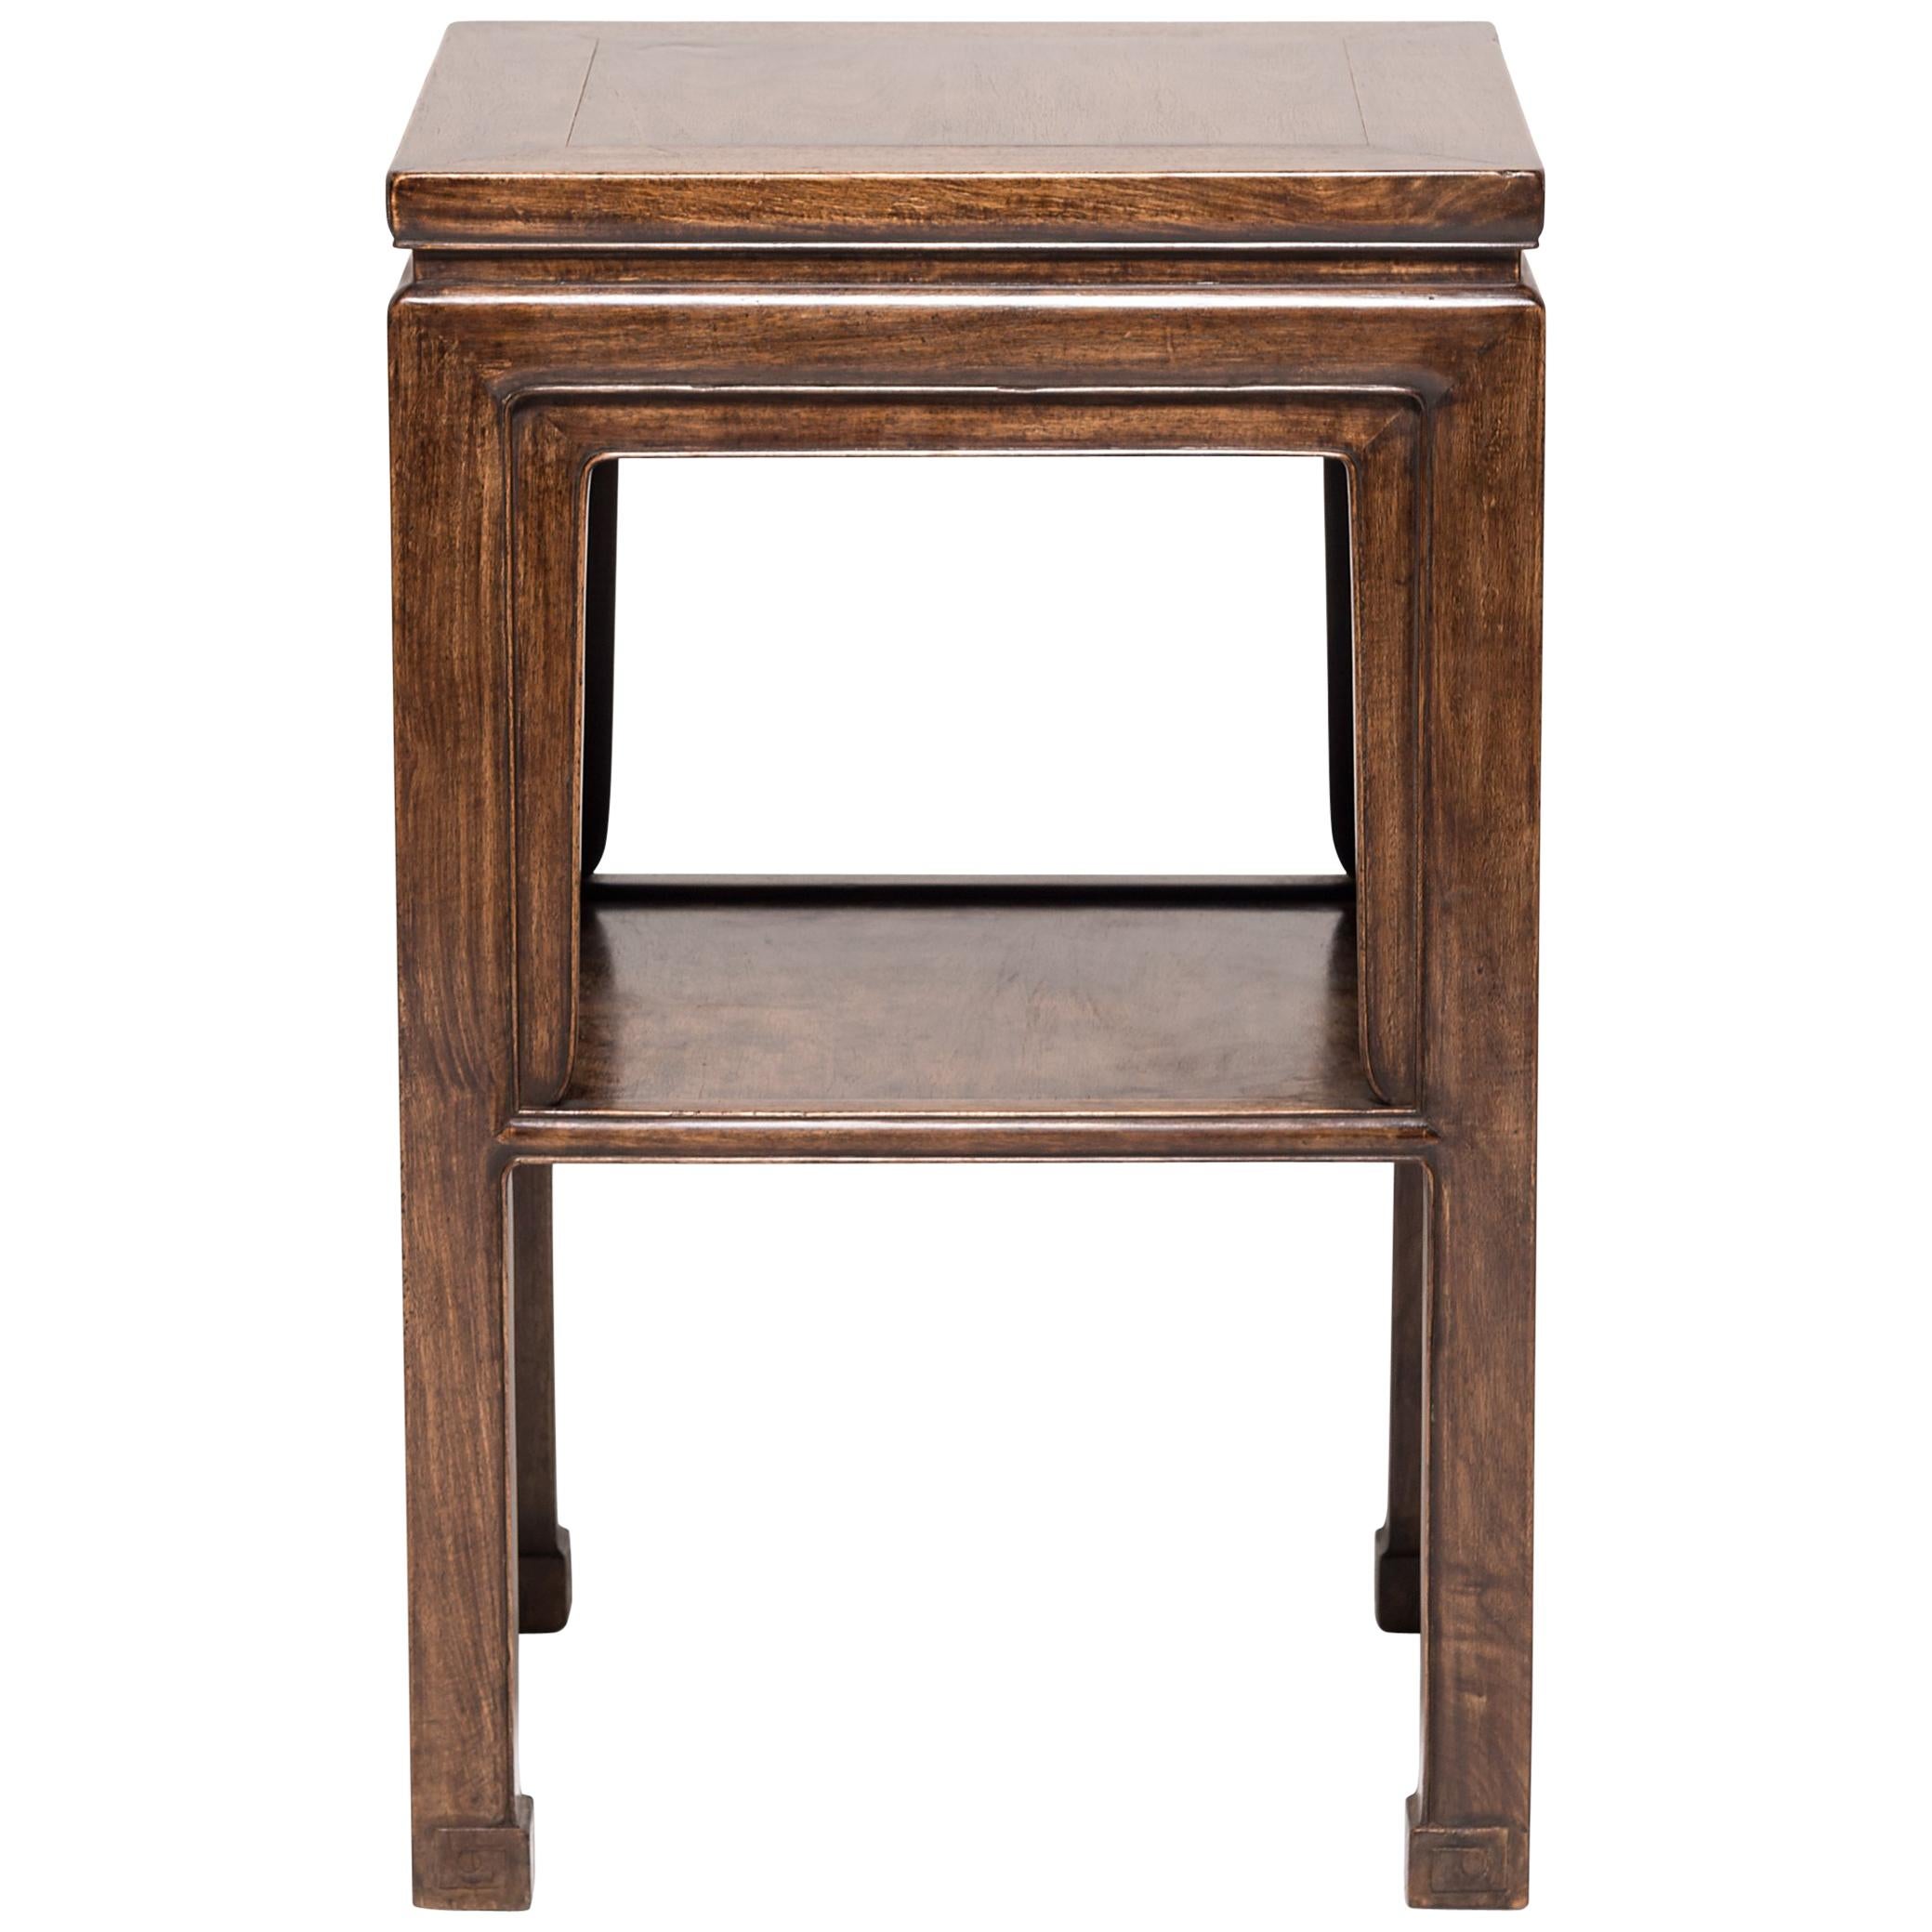 Early 20th Century Chinese Huali Display Table with Shelf